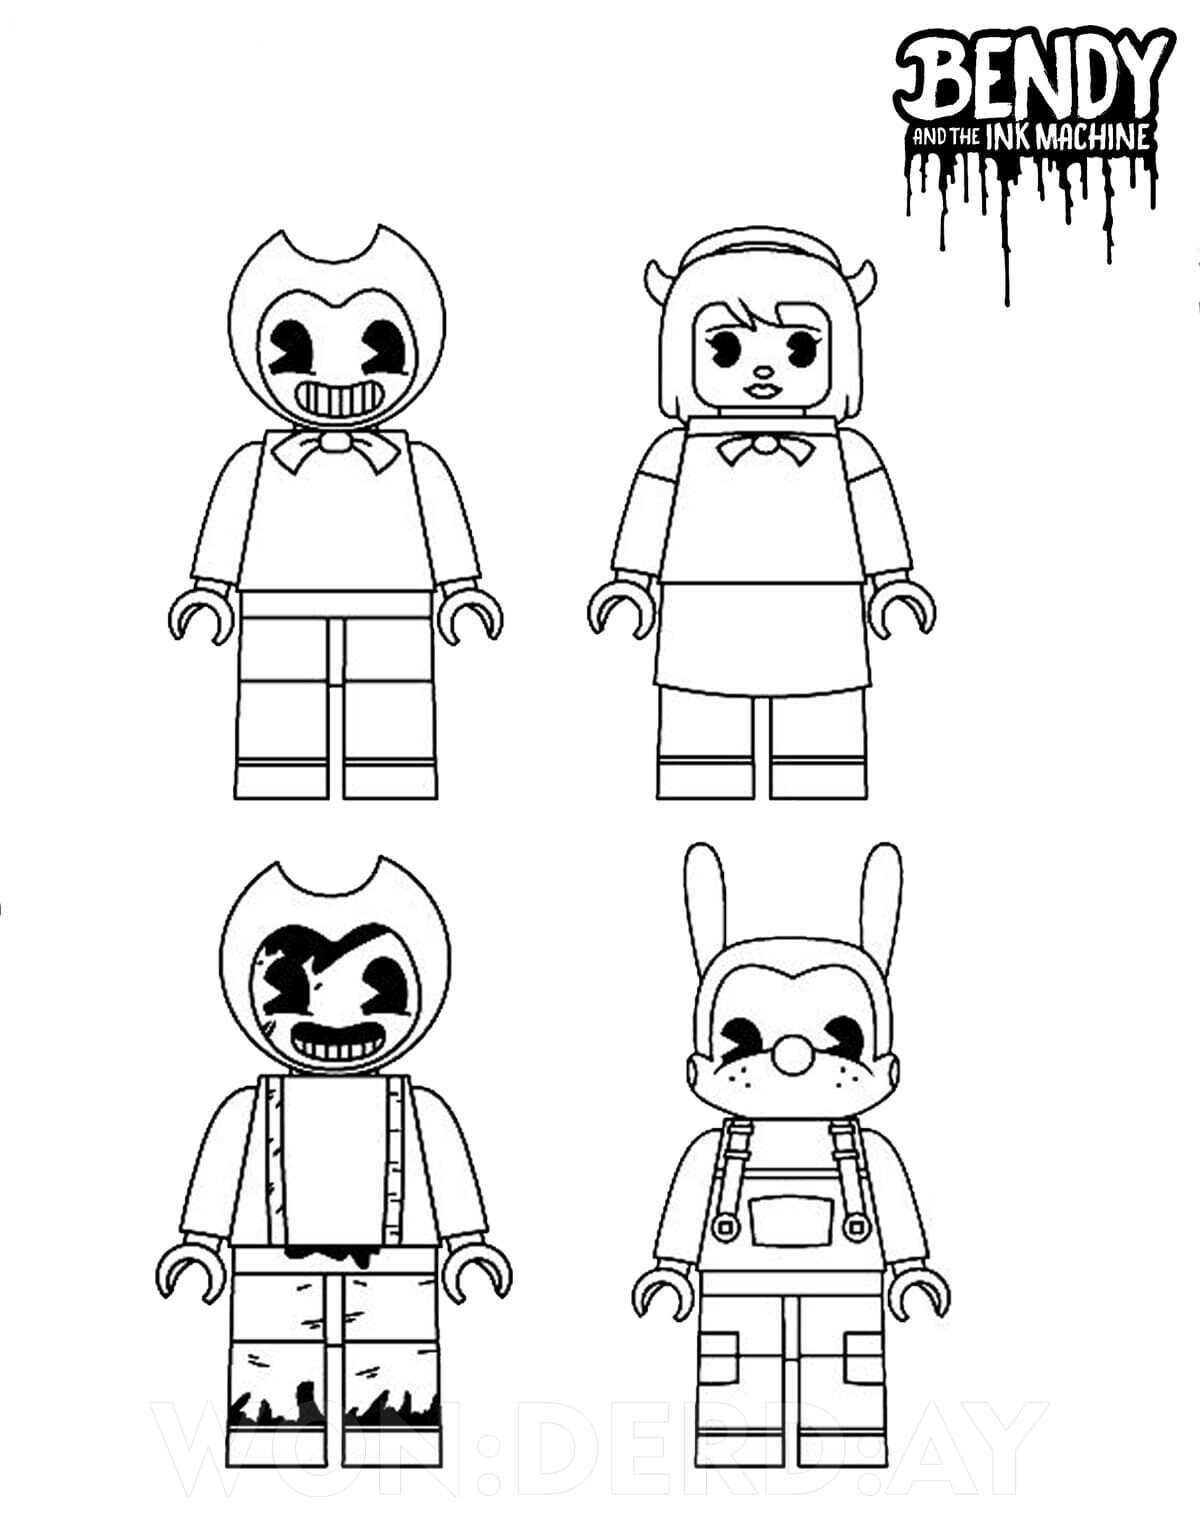 Lego Bendy and friends from Bendy and the Ink Machine Coloring Page